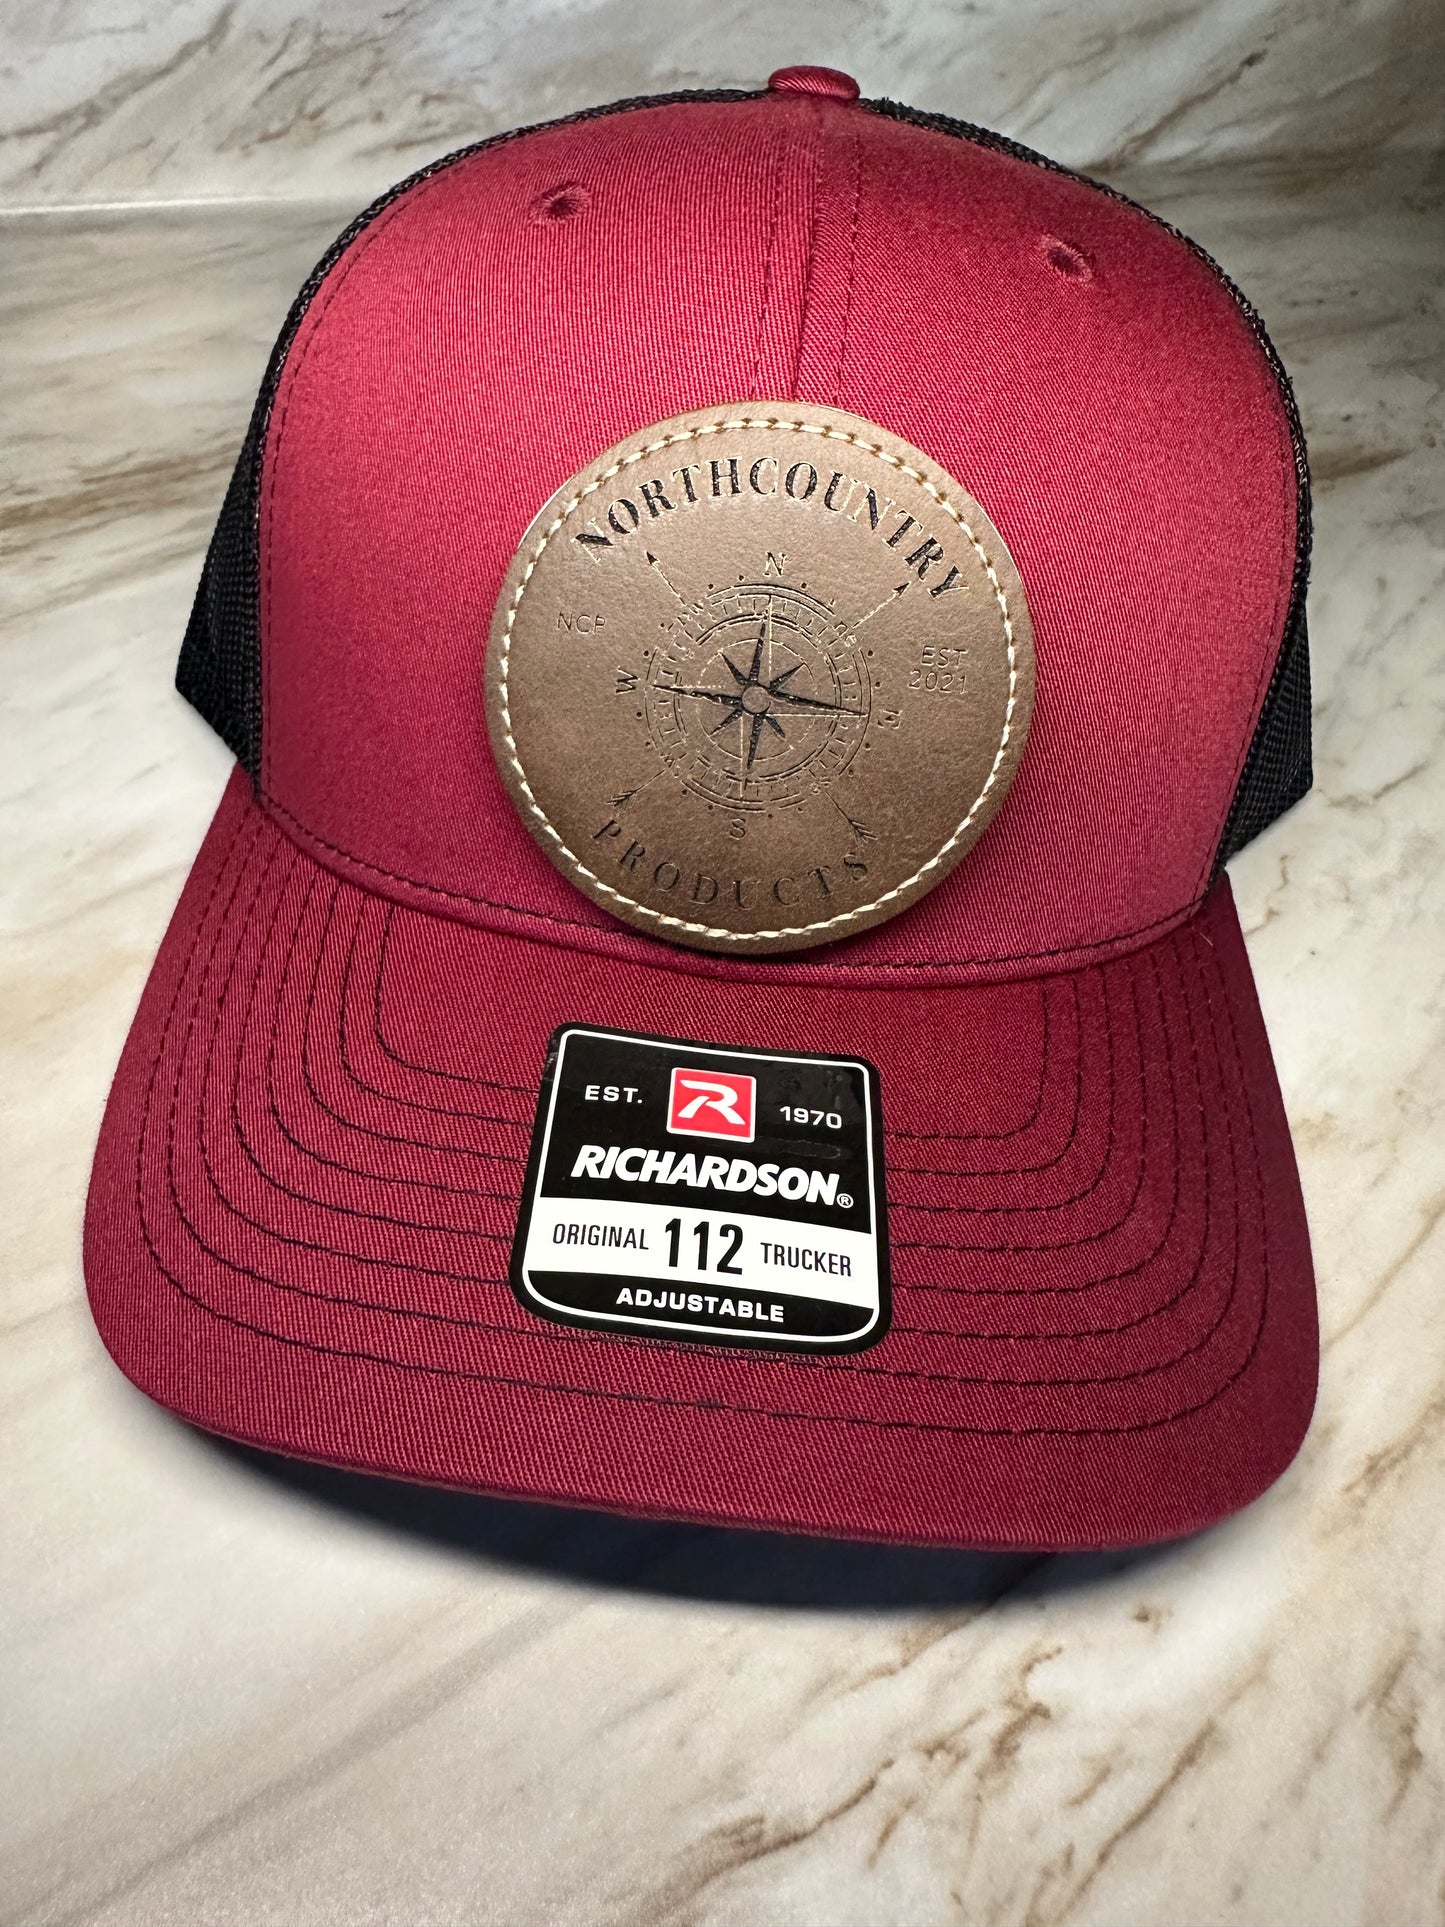 NorthCountry Products Hats